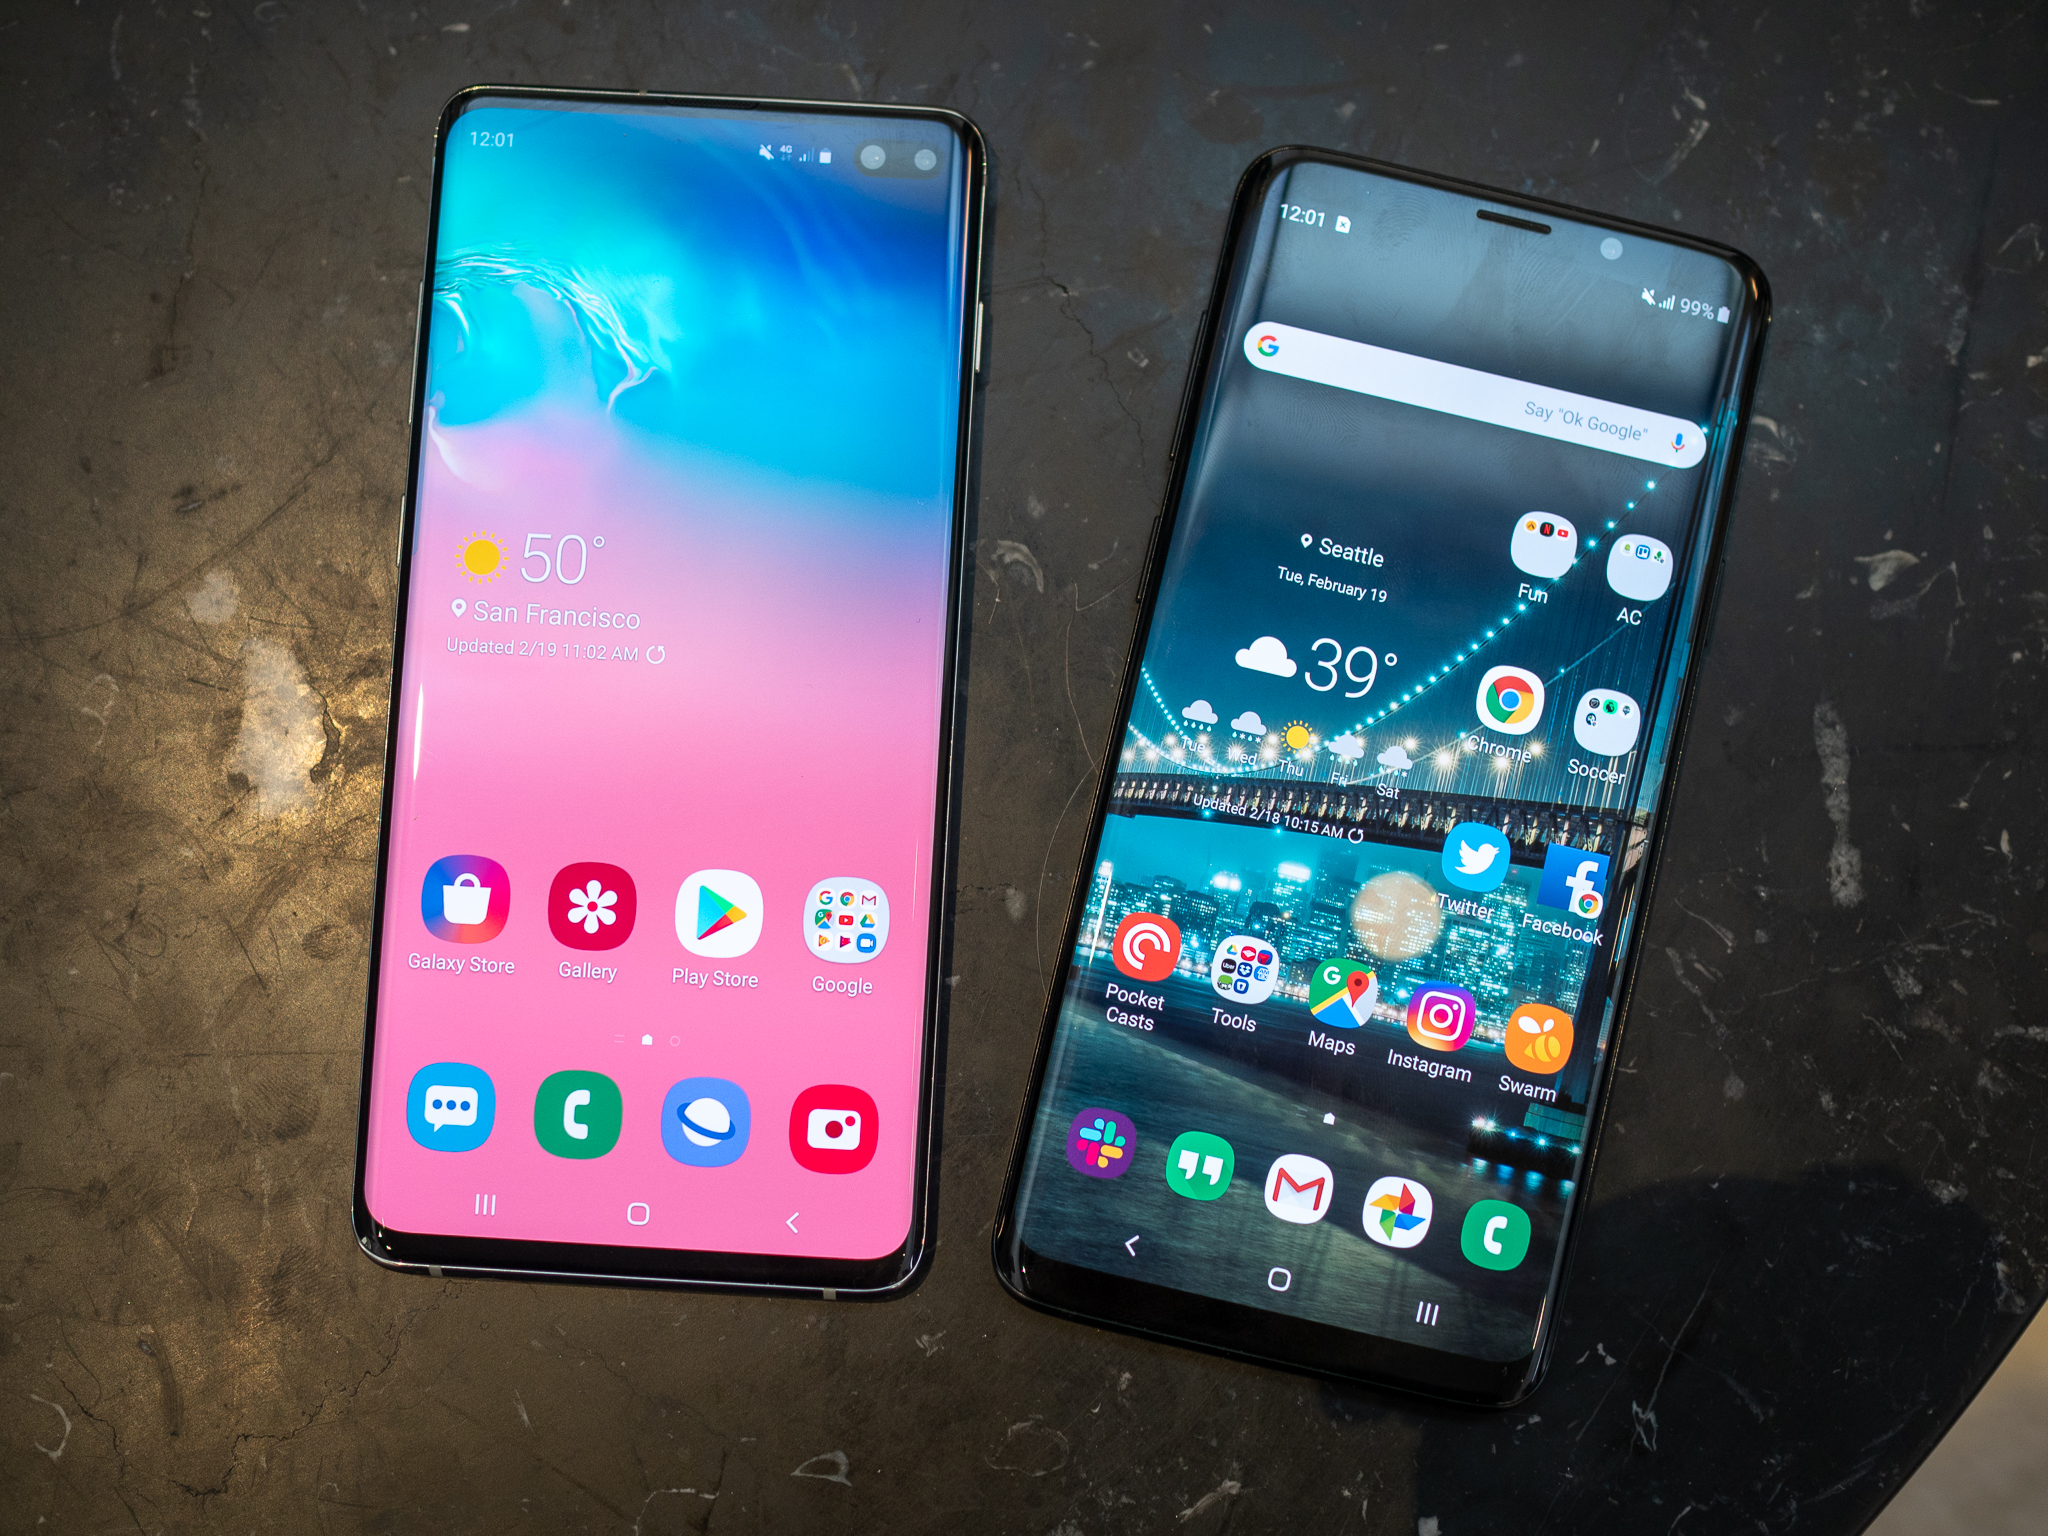 https://www.androidcentral.com/sites/androidcentral.com/files/styles/large_wm_brw/public/article_images/2019/02/galaxy-s10-plus-vs-galaxy-s9-plus-1.jpg?itok=aRWtv4Zx